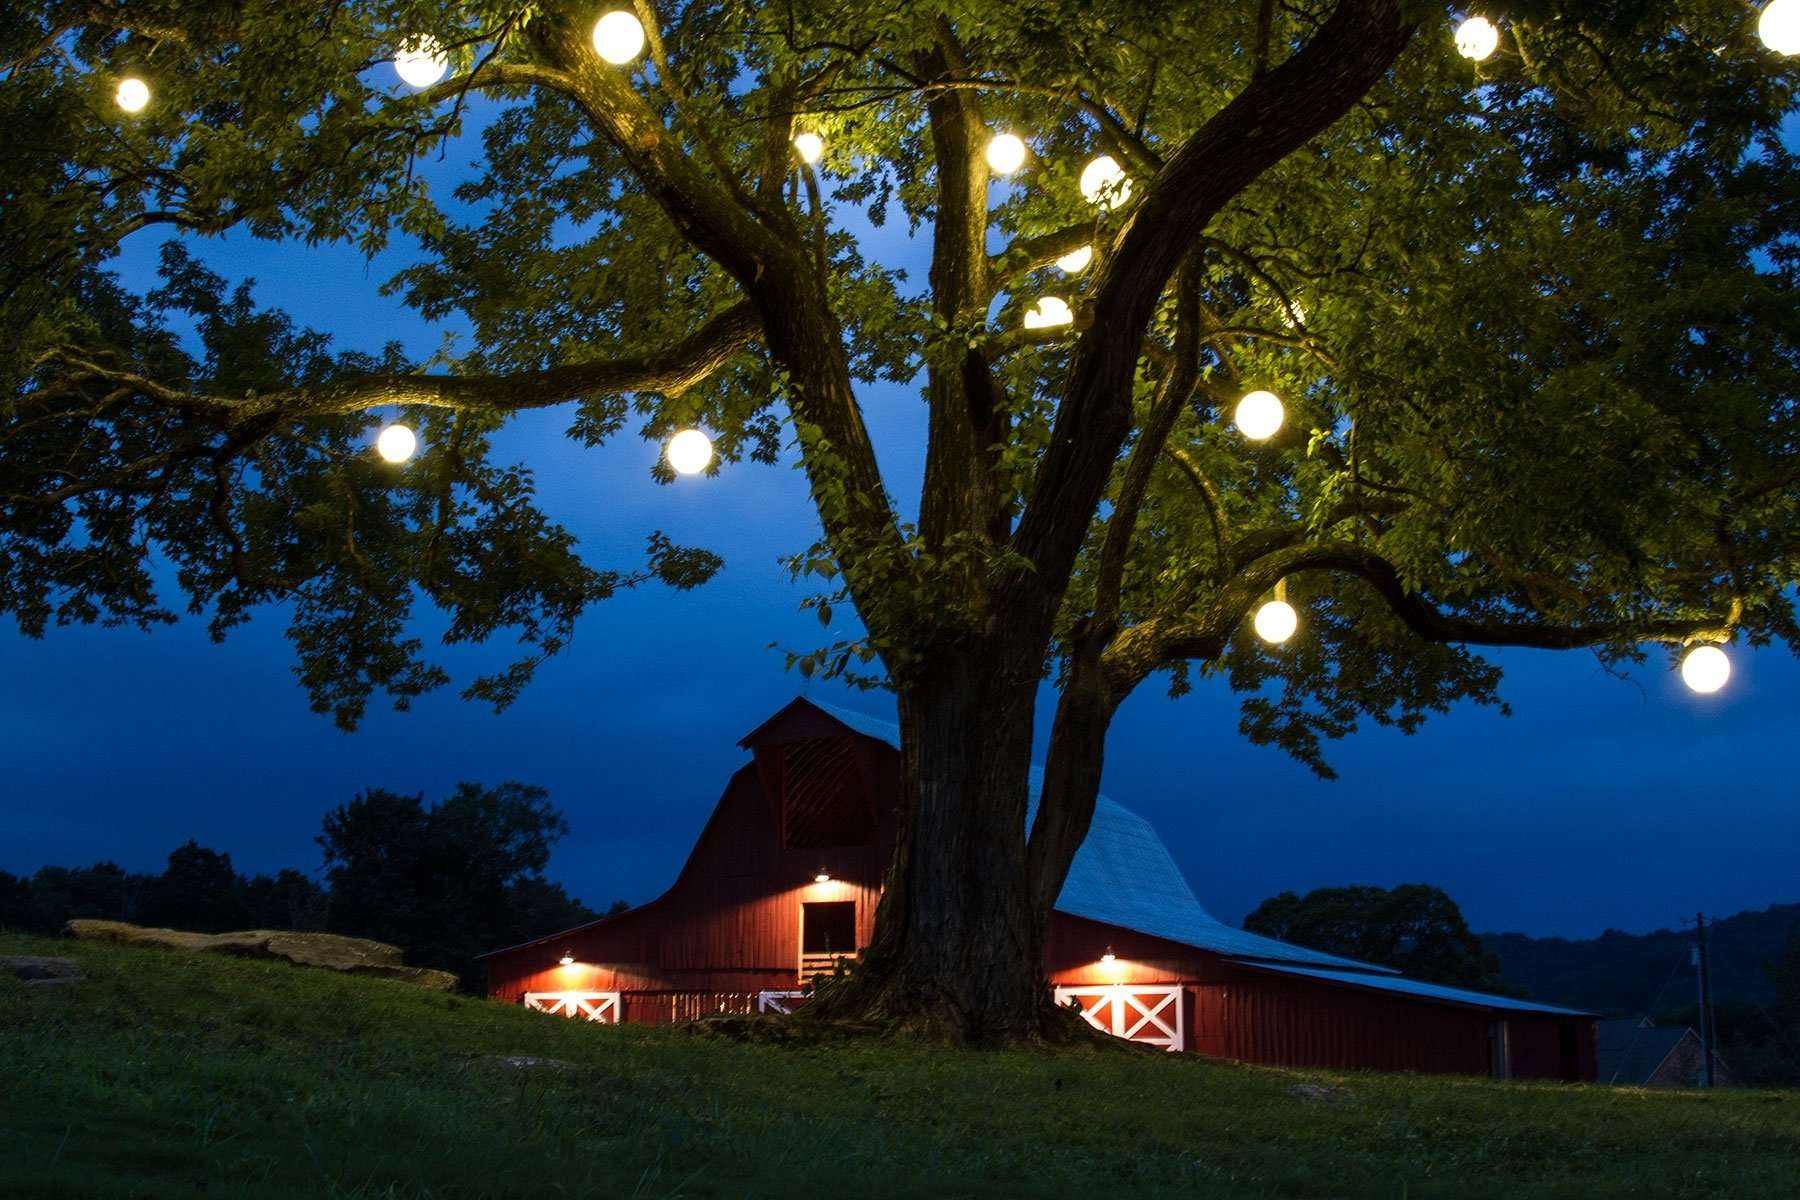 15 Best of Hanging Lights on an Outdoor Tree